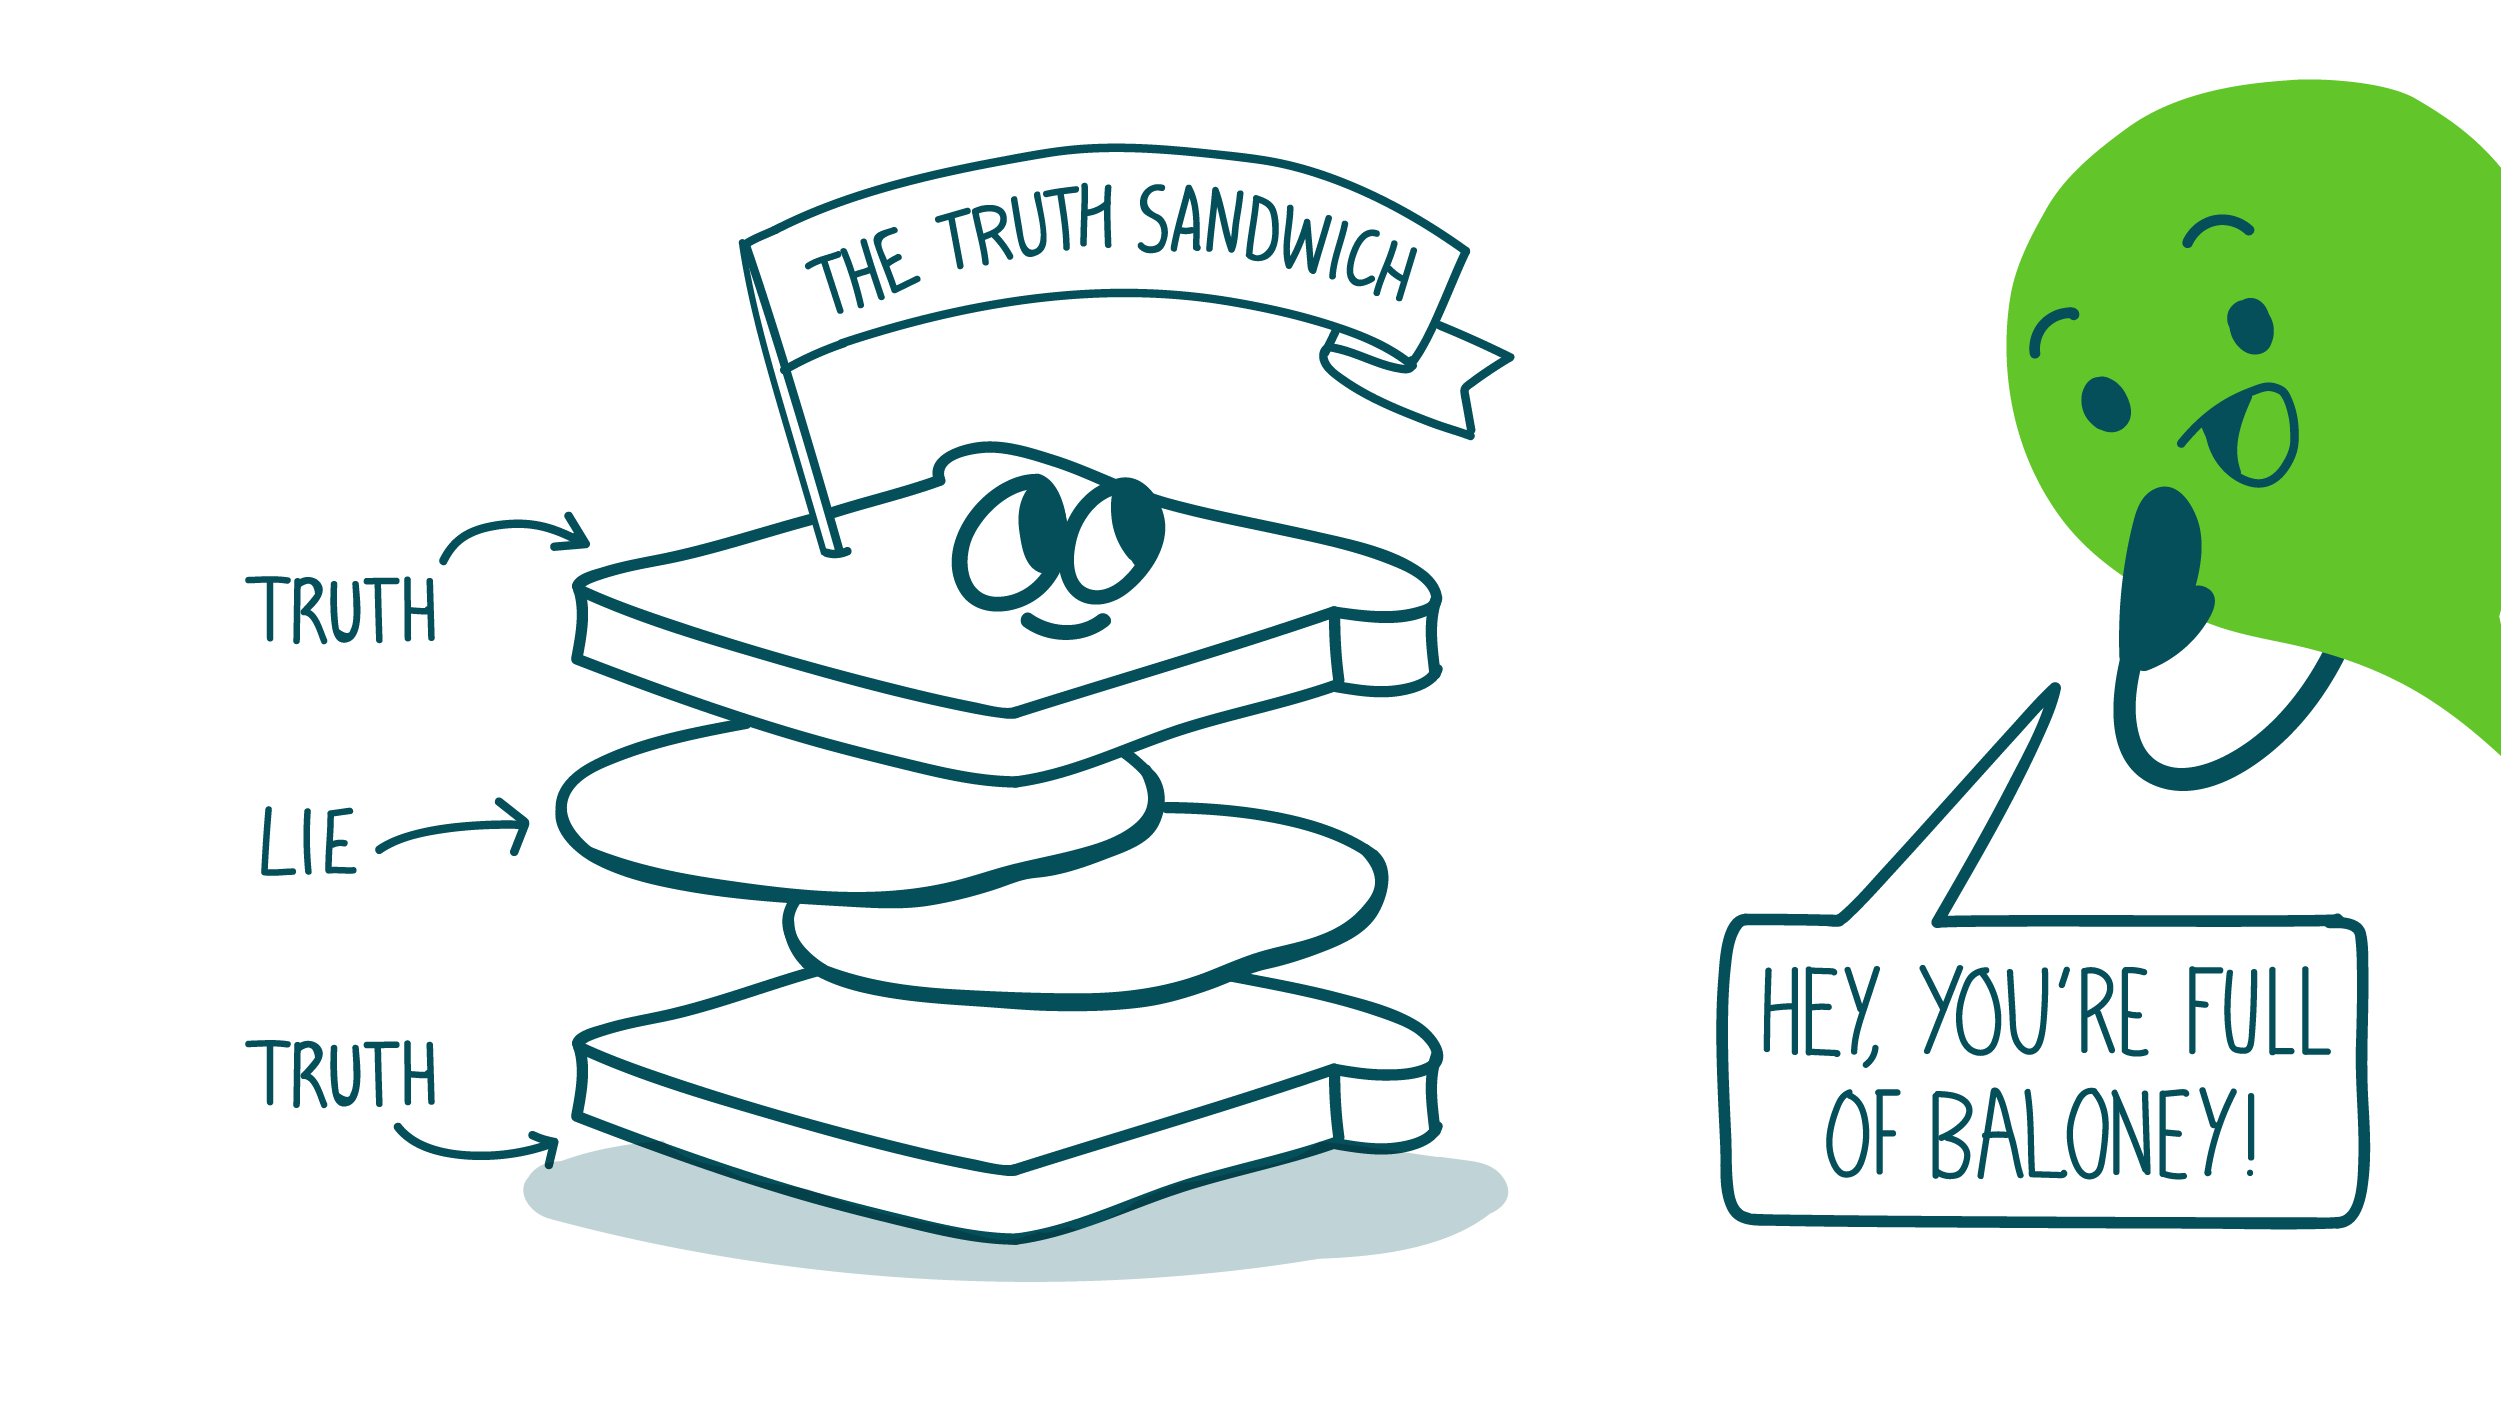 A doodle looks at a truth sandwich. The sandwich is made of a lie between 2 slices of truth bread. The doodle says to the sandwich, “Hey, you’re full of baloney!”